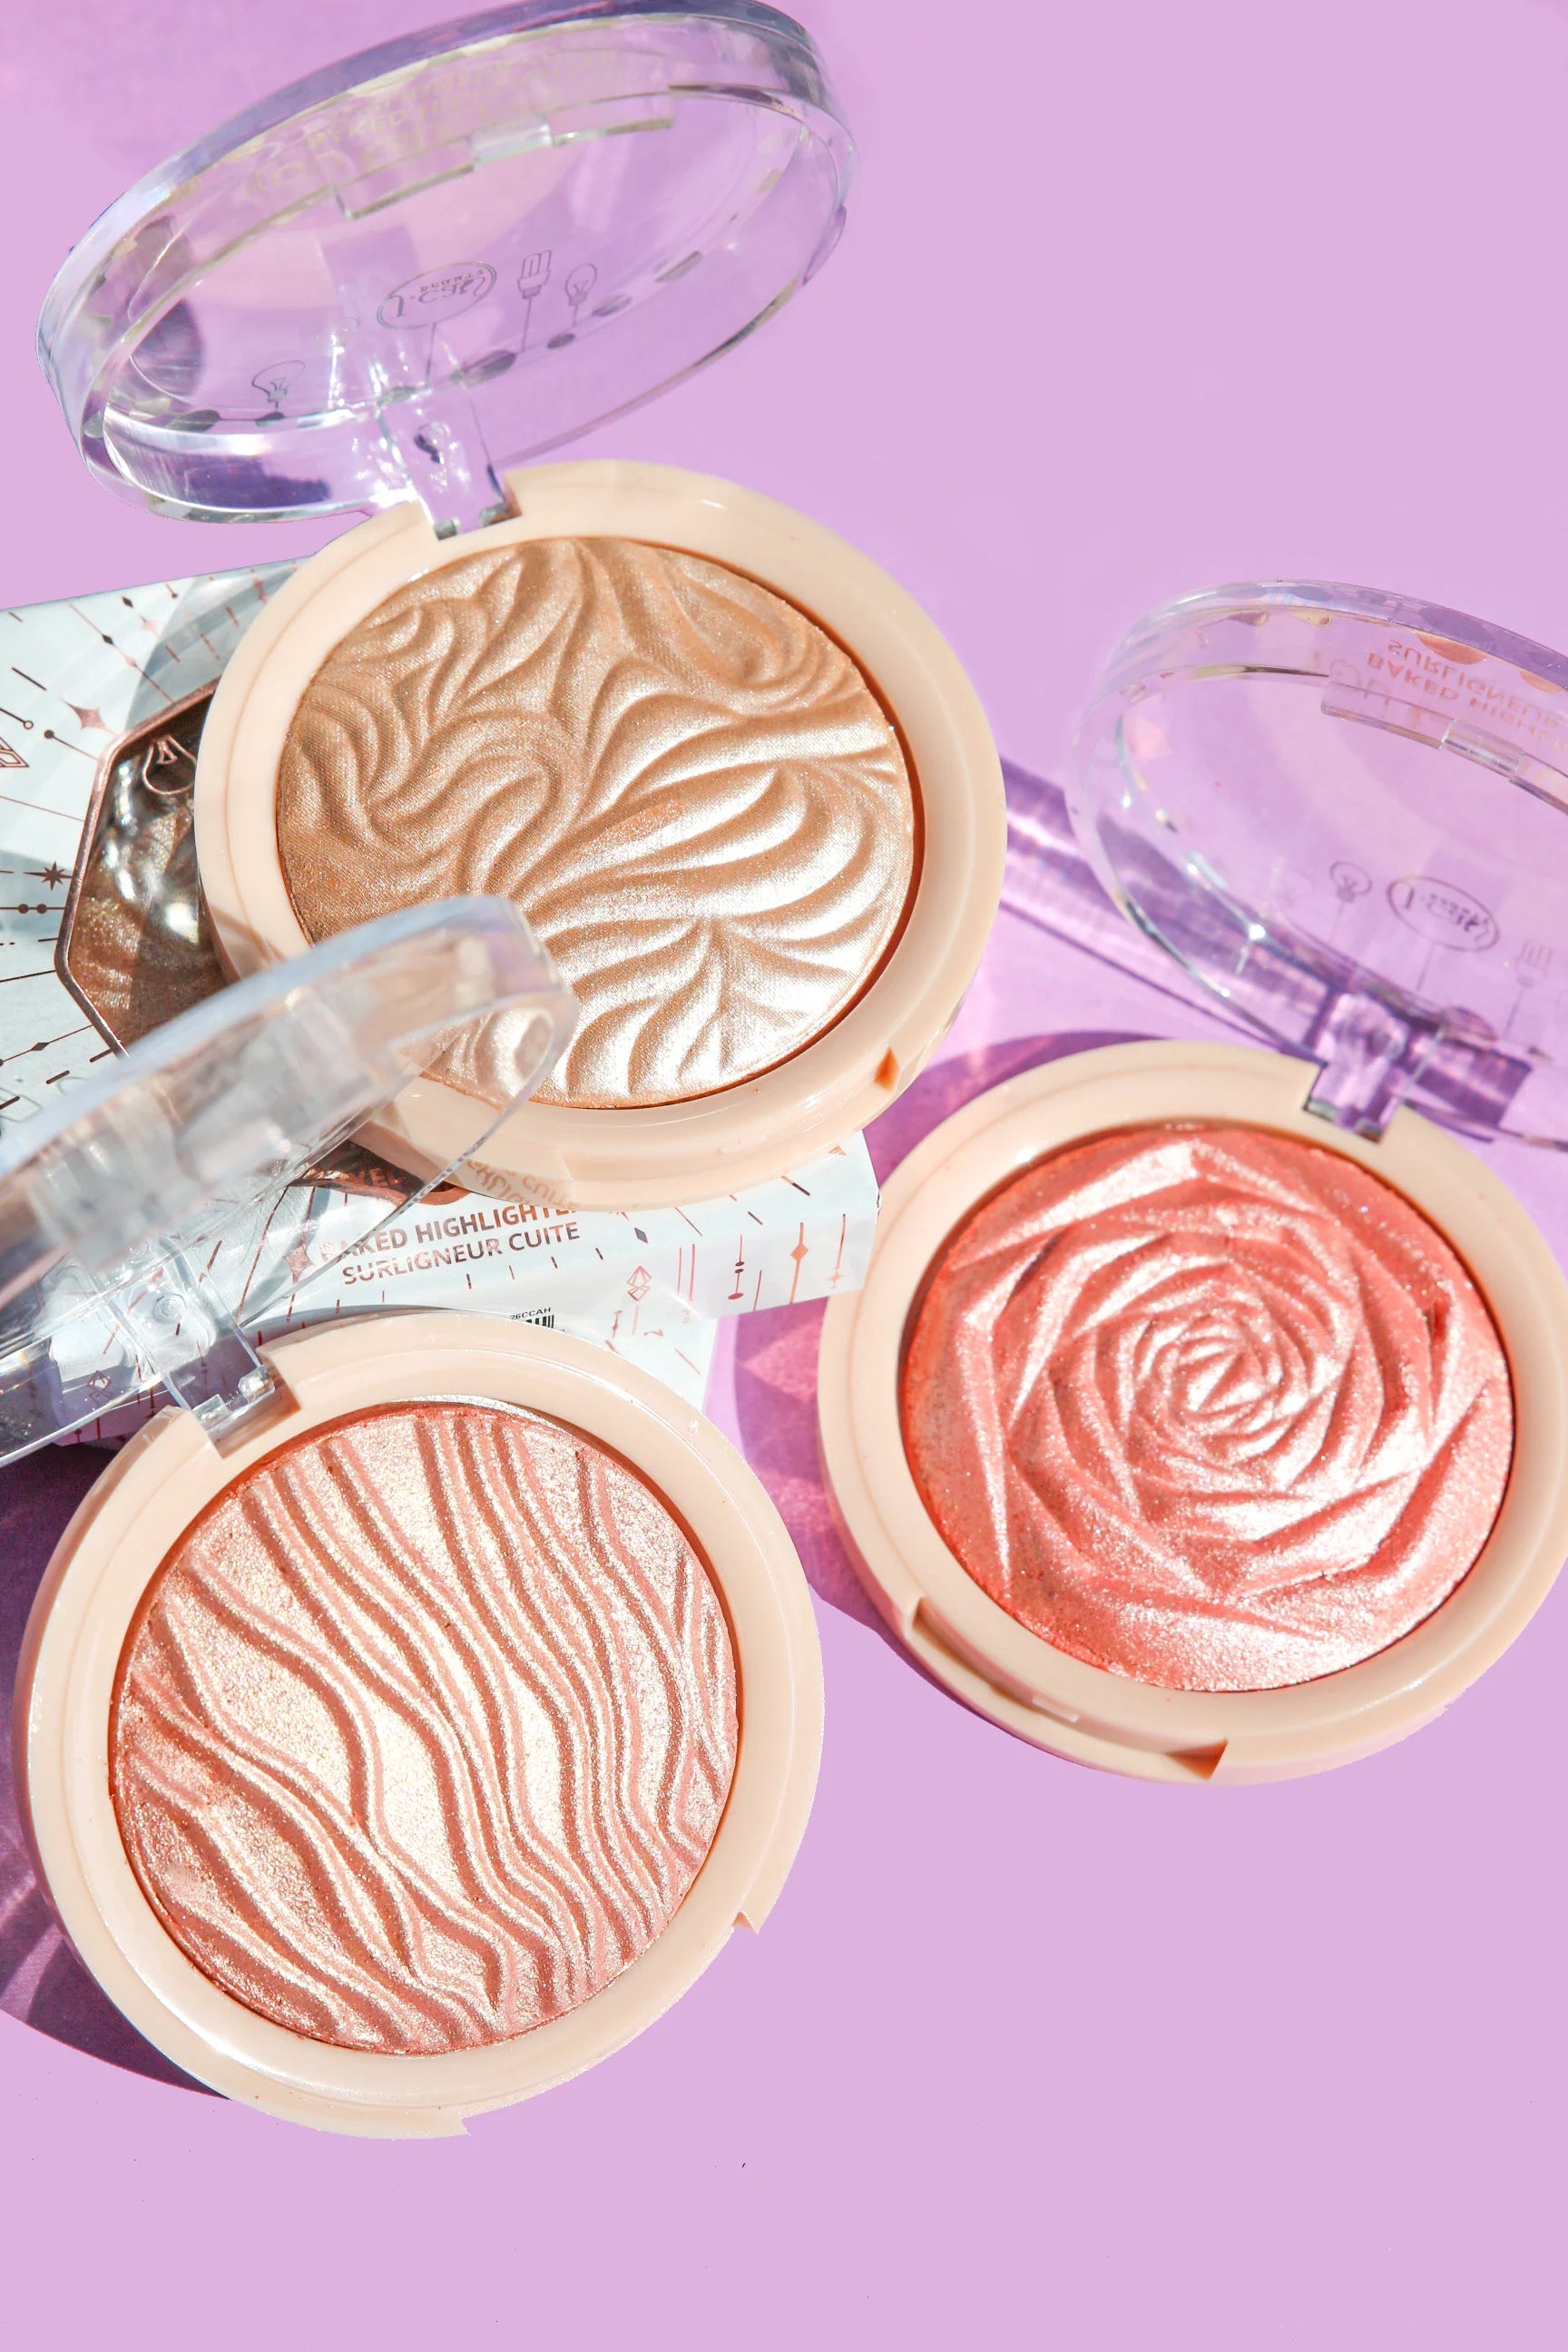 You Glow Girl Baked Highlighter (Surligneur au four)